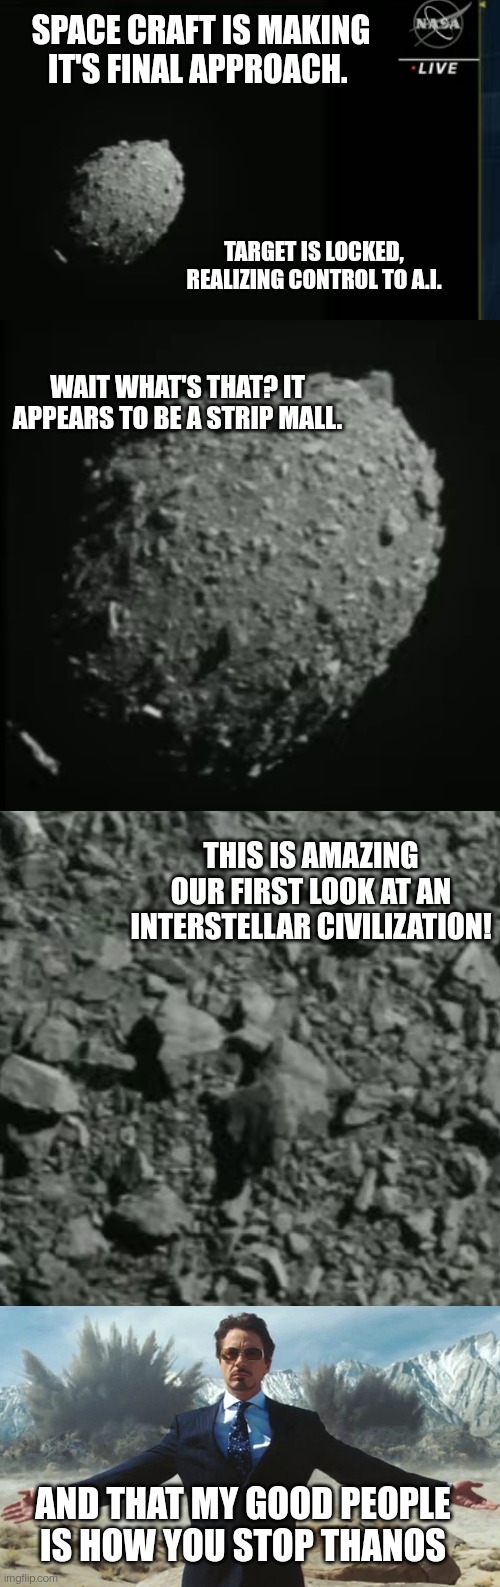 SPACE CRAFT IS MAKING IT'S FINAL APPROACH. TARGET IS LOCKED, REALIZING CONTROL TO A.I. WAIT WHAT'S THAT? IT APPEARS TO BE A STRIP MALL. THIS IS AMAZING OUR FIRST LOOK AT AN INTERSTELLAR CIVILIZATION! AND THAT MY GOOD PEOPLE IS HOW YOU STOP THANOS | image tagged in asteroid,asteroid 2,asteroid close | made w/ Imgflip meme maker